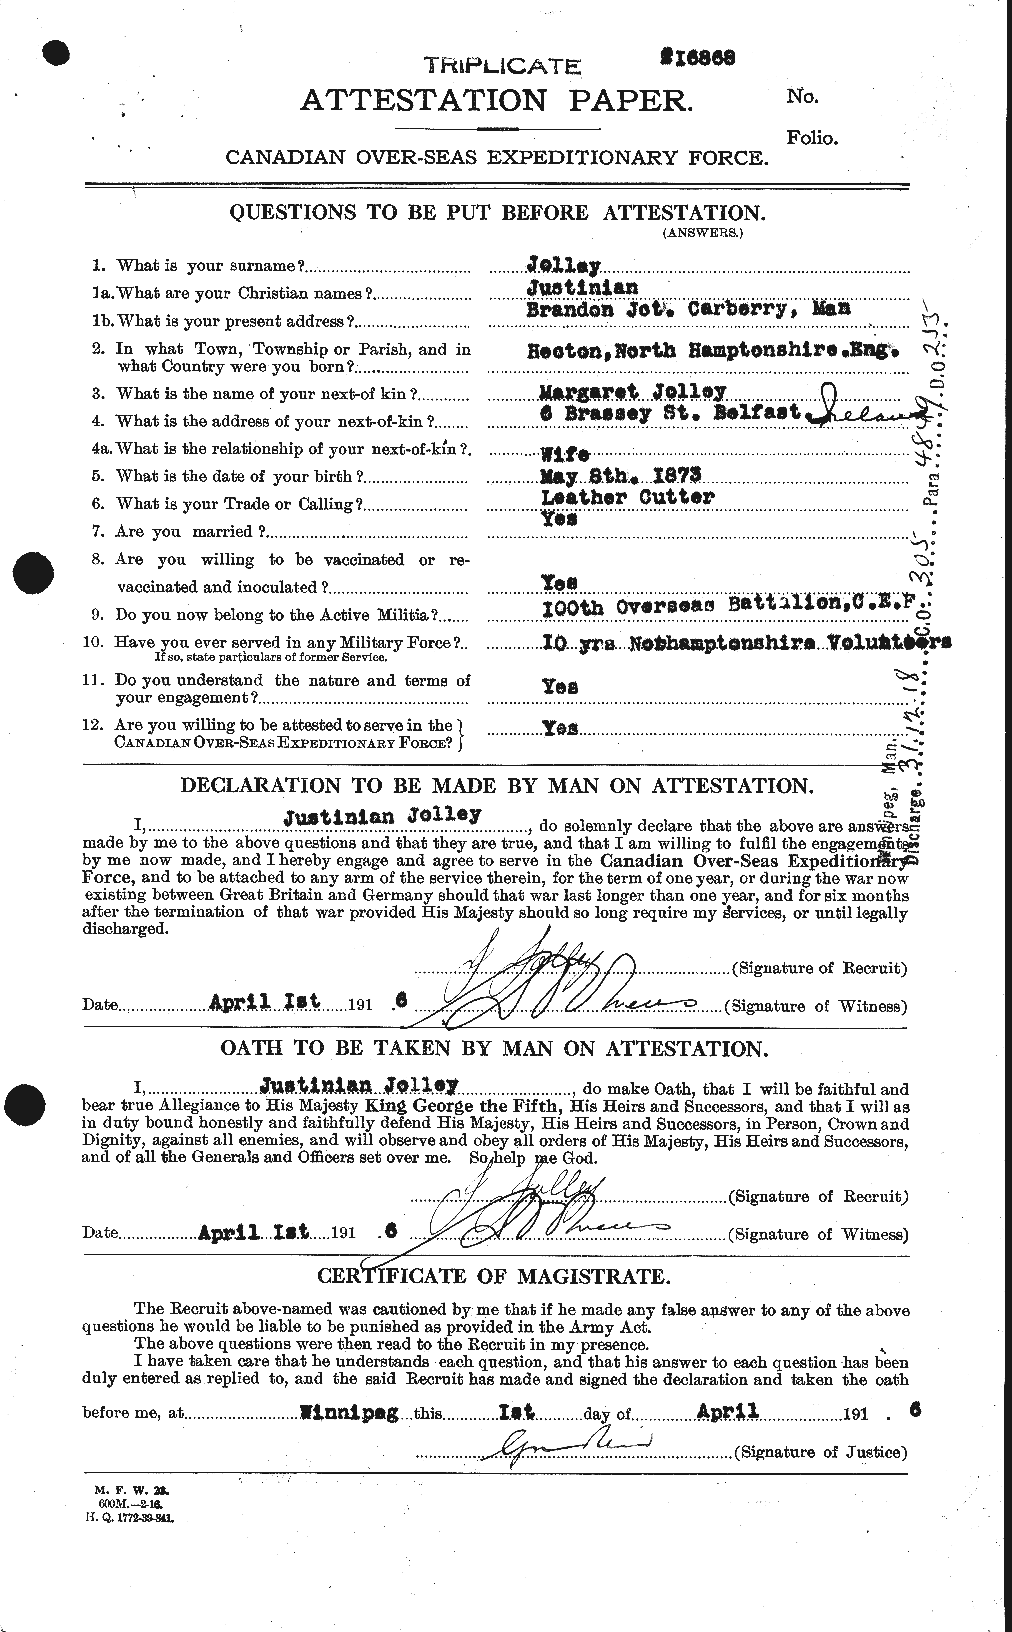 Personnel Records of the First World War - CEF 419867a